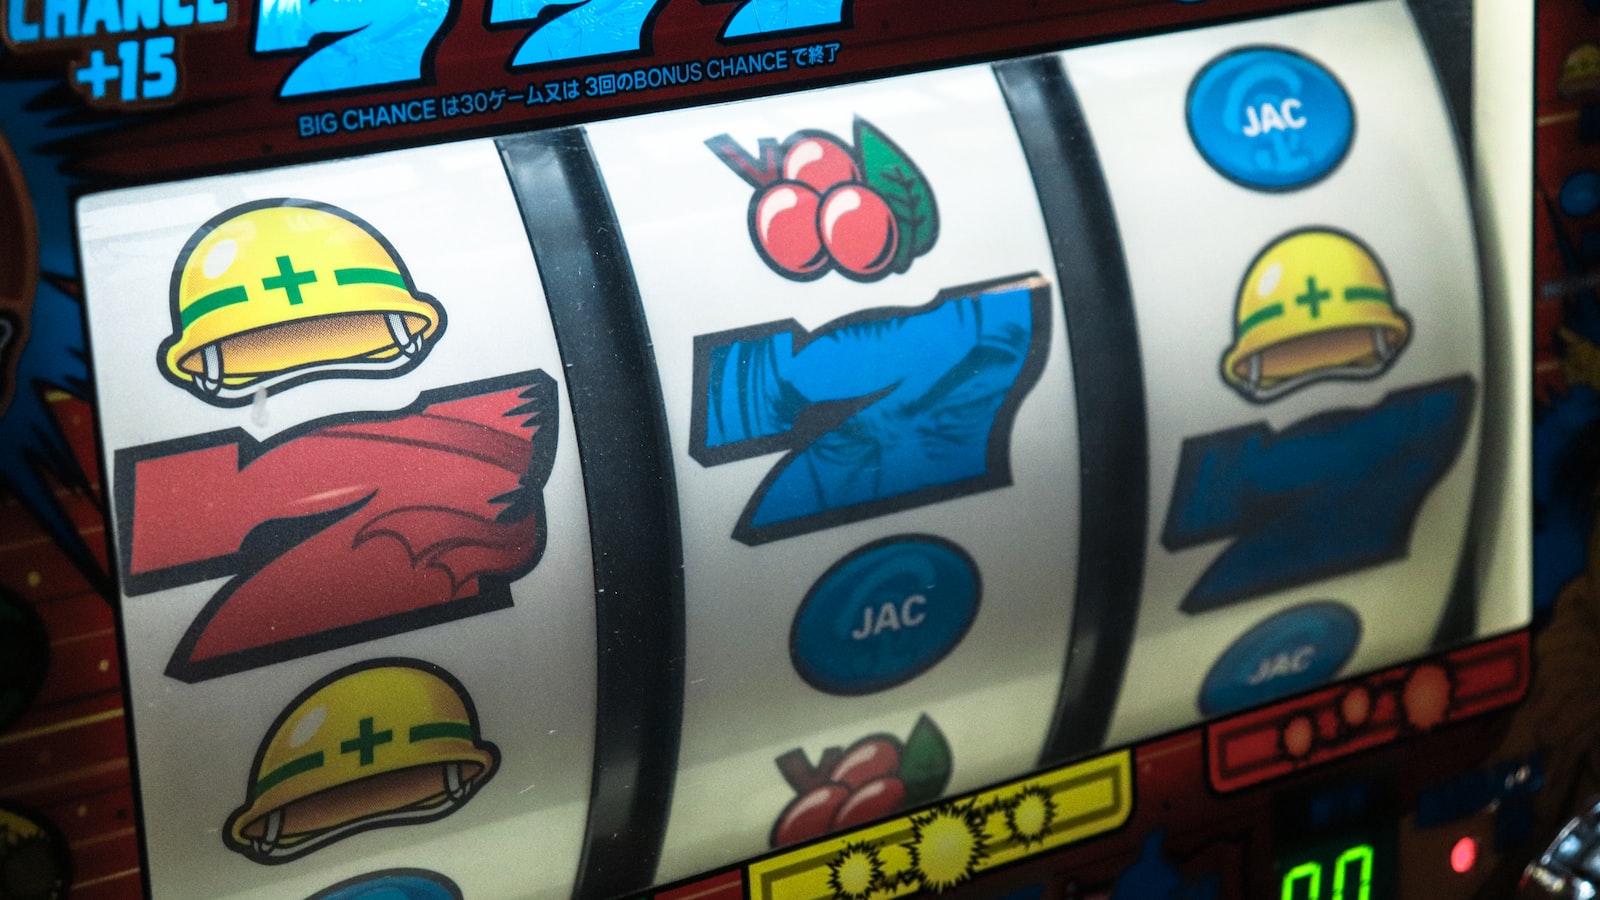 2. Advantages of Playing Slot Machines Online